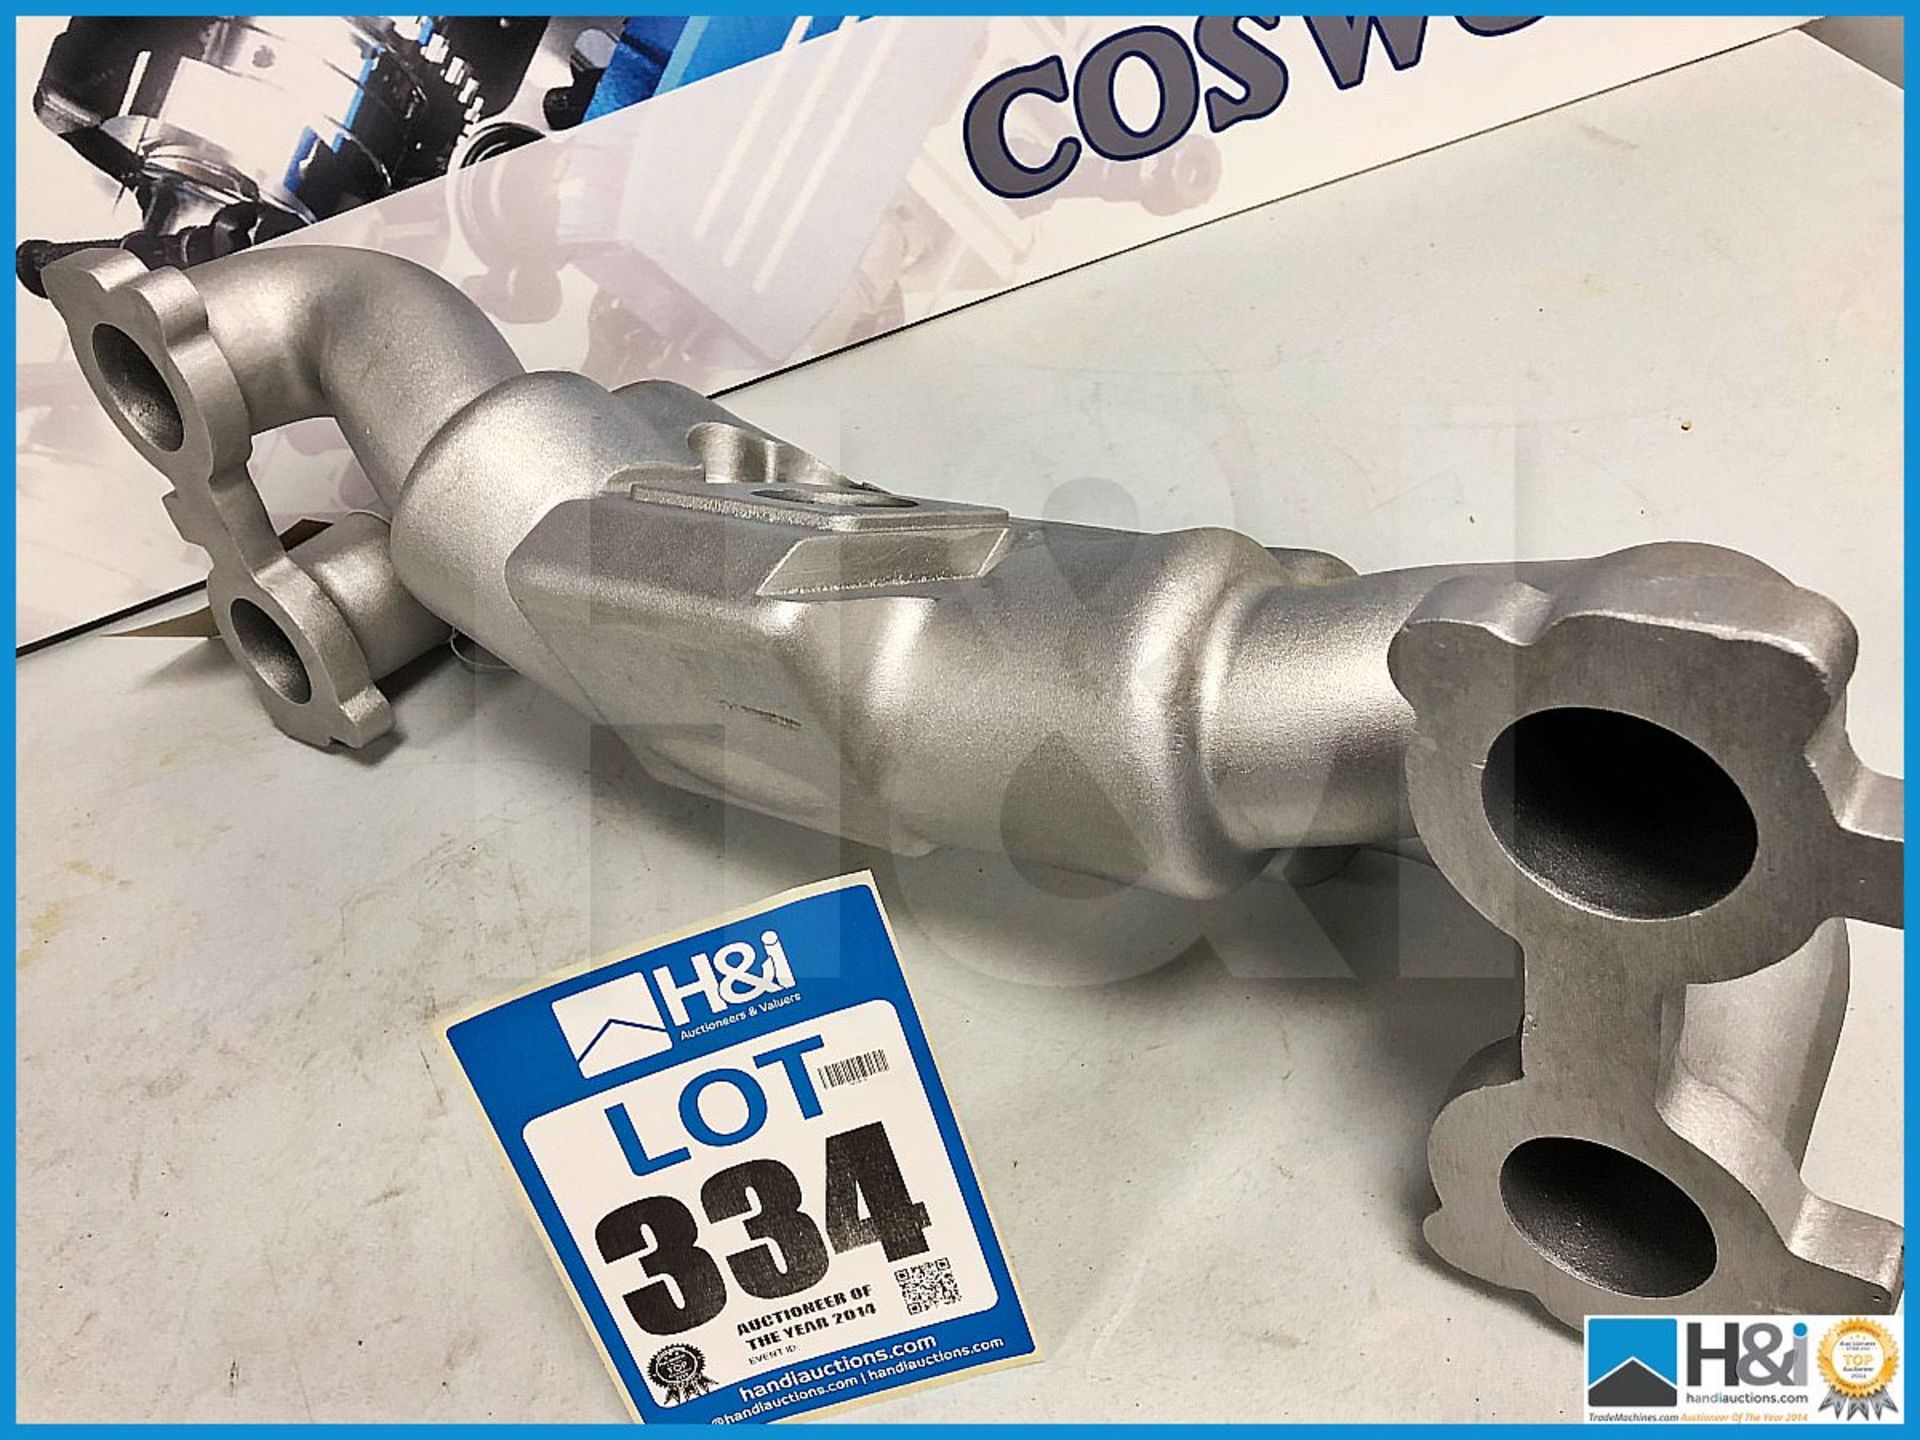 26 x Cosworth Subaru EJ25 inlet manifold casting. Code: 2003408. Lot 5. RRP GBP 4,100 - Image 2 of 2